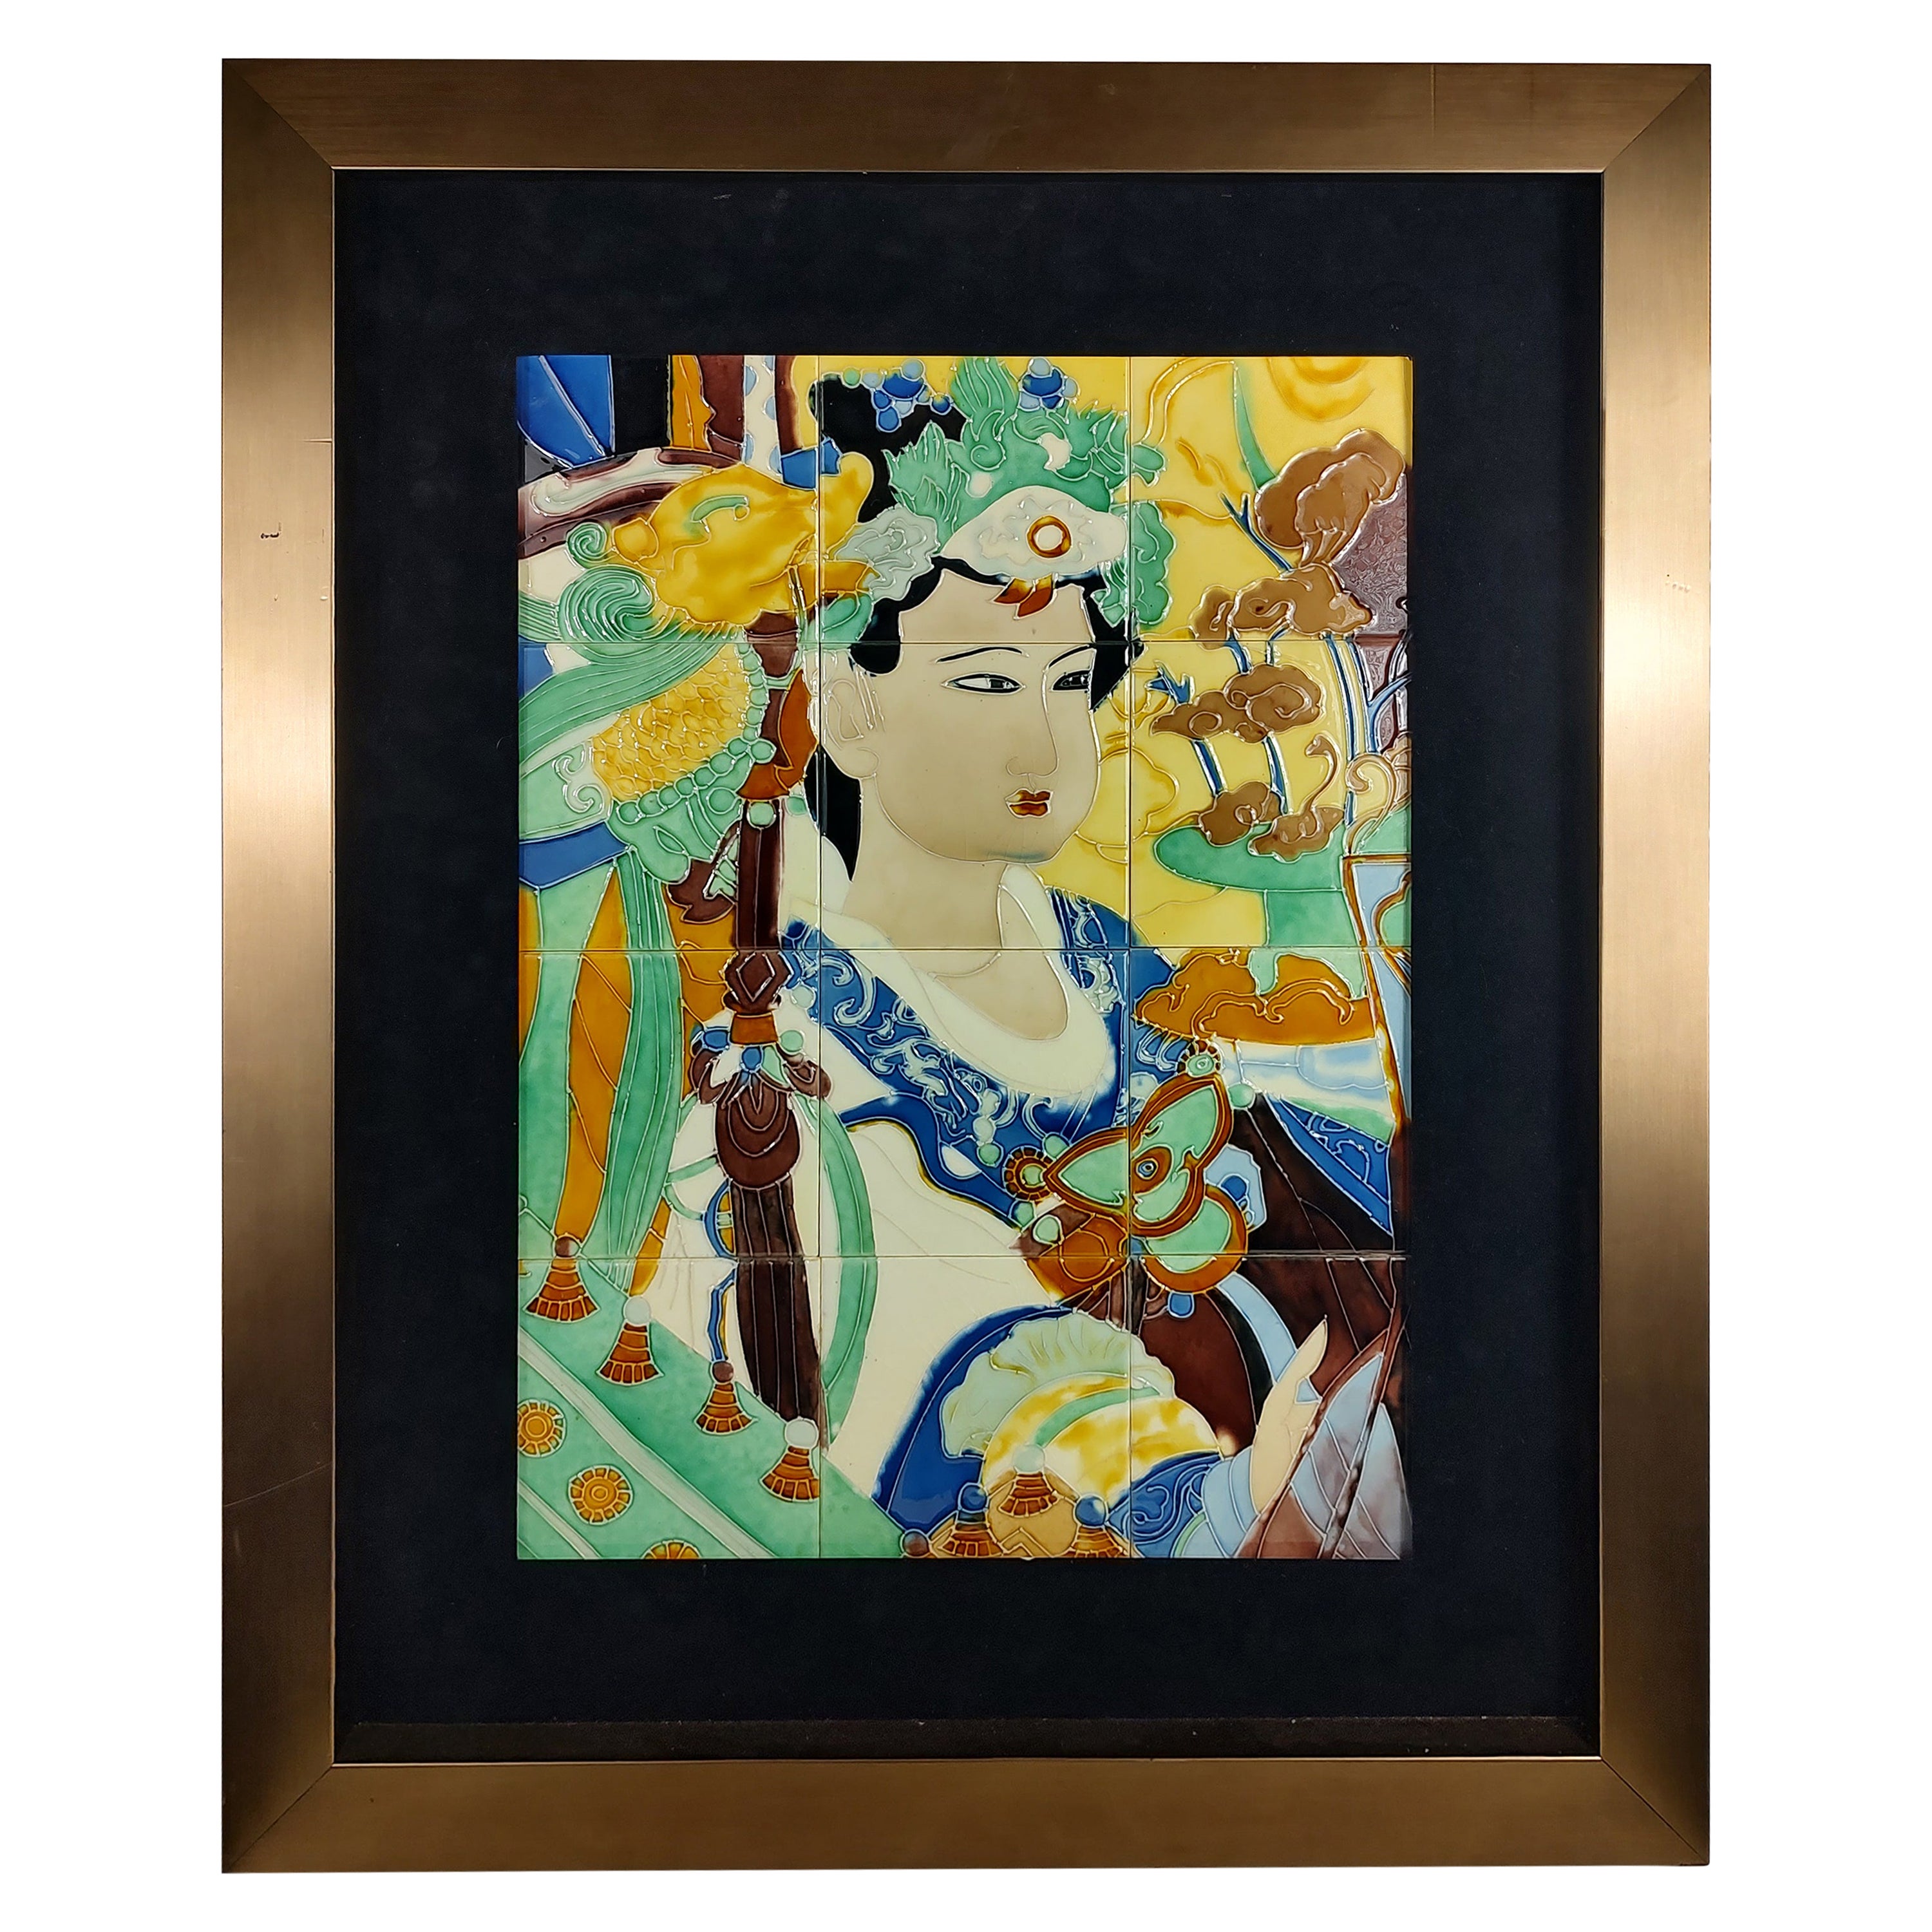 Fabulous depiction of a Japanese Geisha in a series of 12 ceramic tiles framed. Each tile is a work of art, beautiful lines and fabulous colors. Framed and matted. In excellent vintage condition with minimal wear, tiles are flawless, scratch to